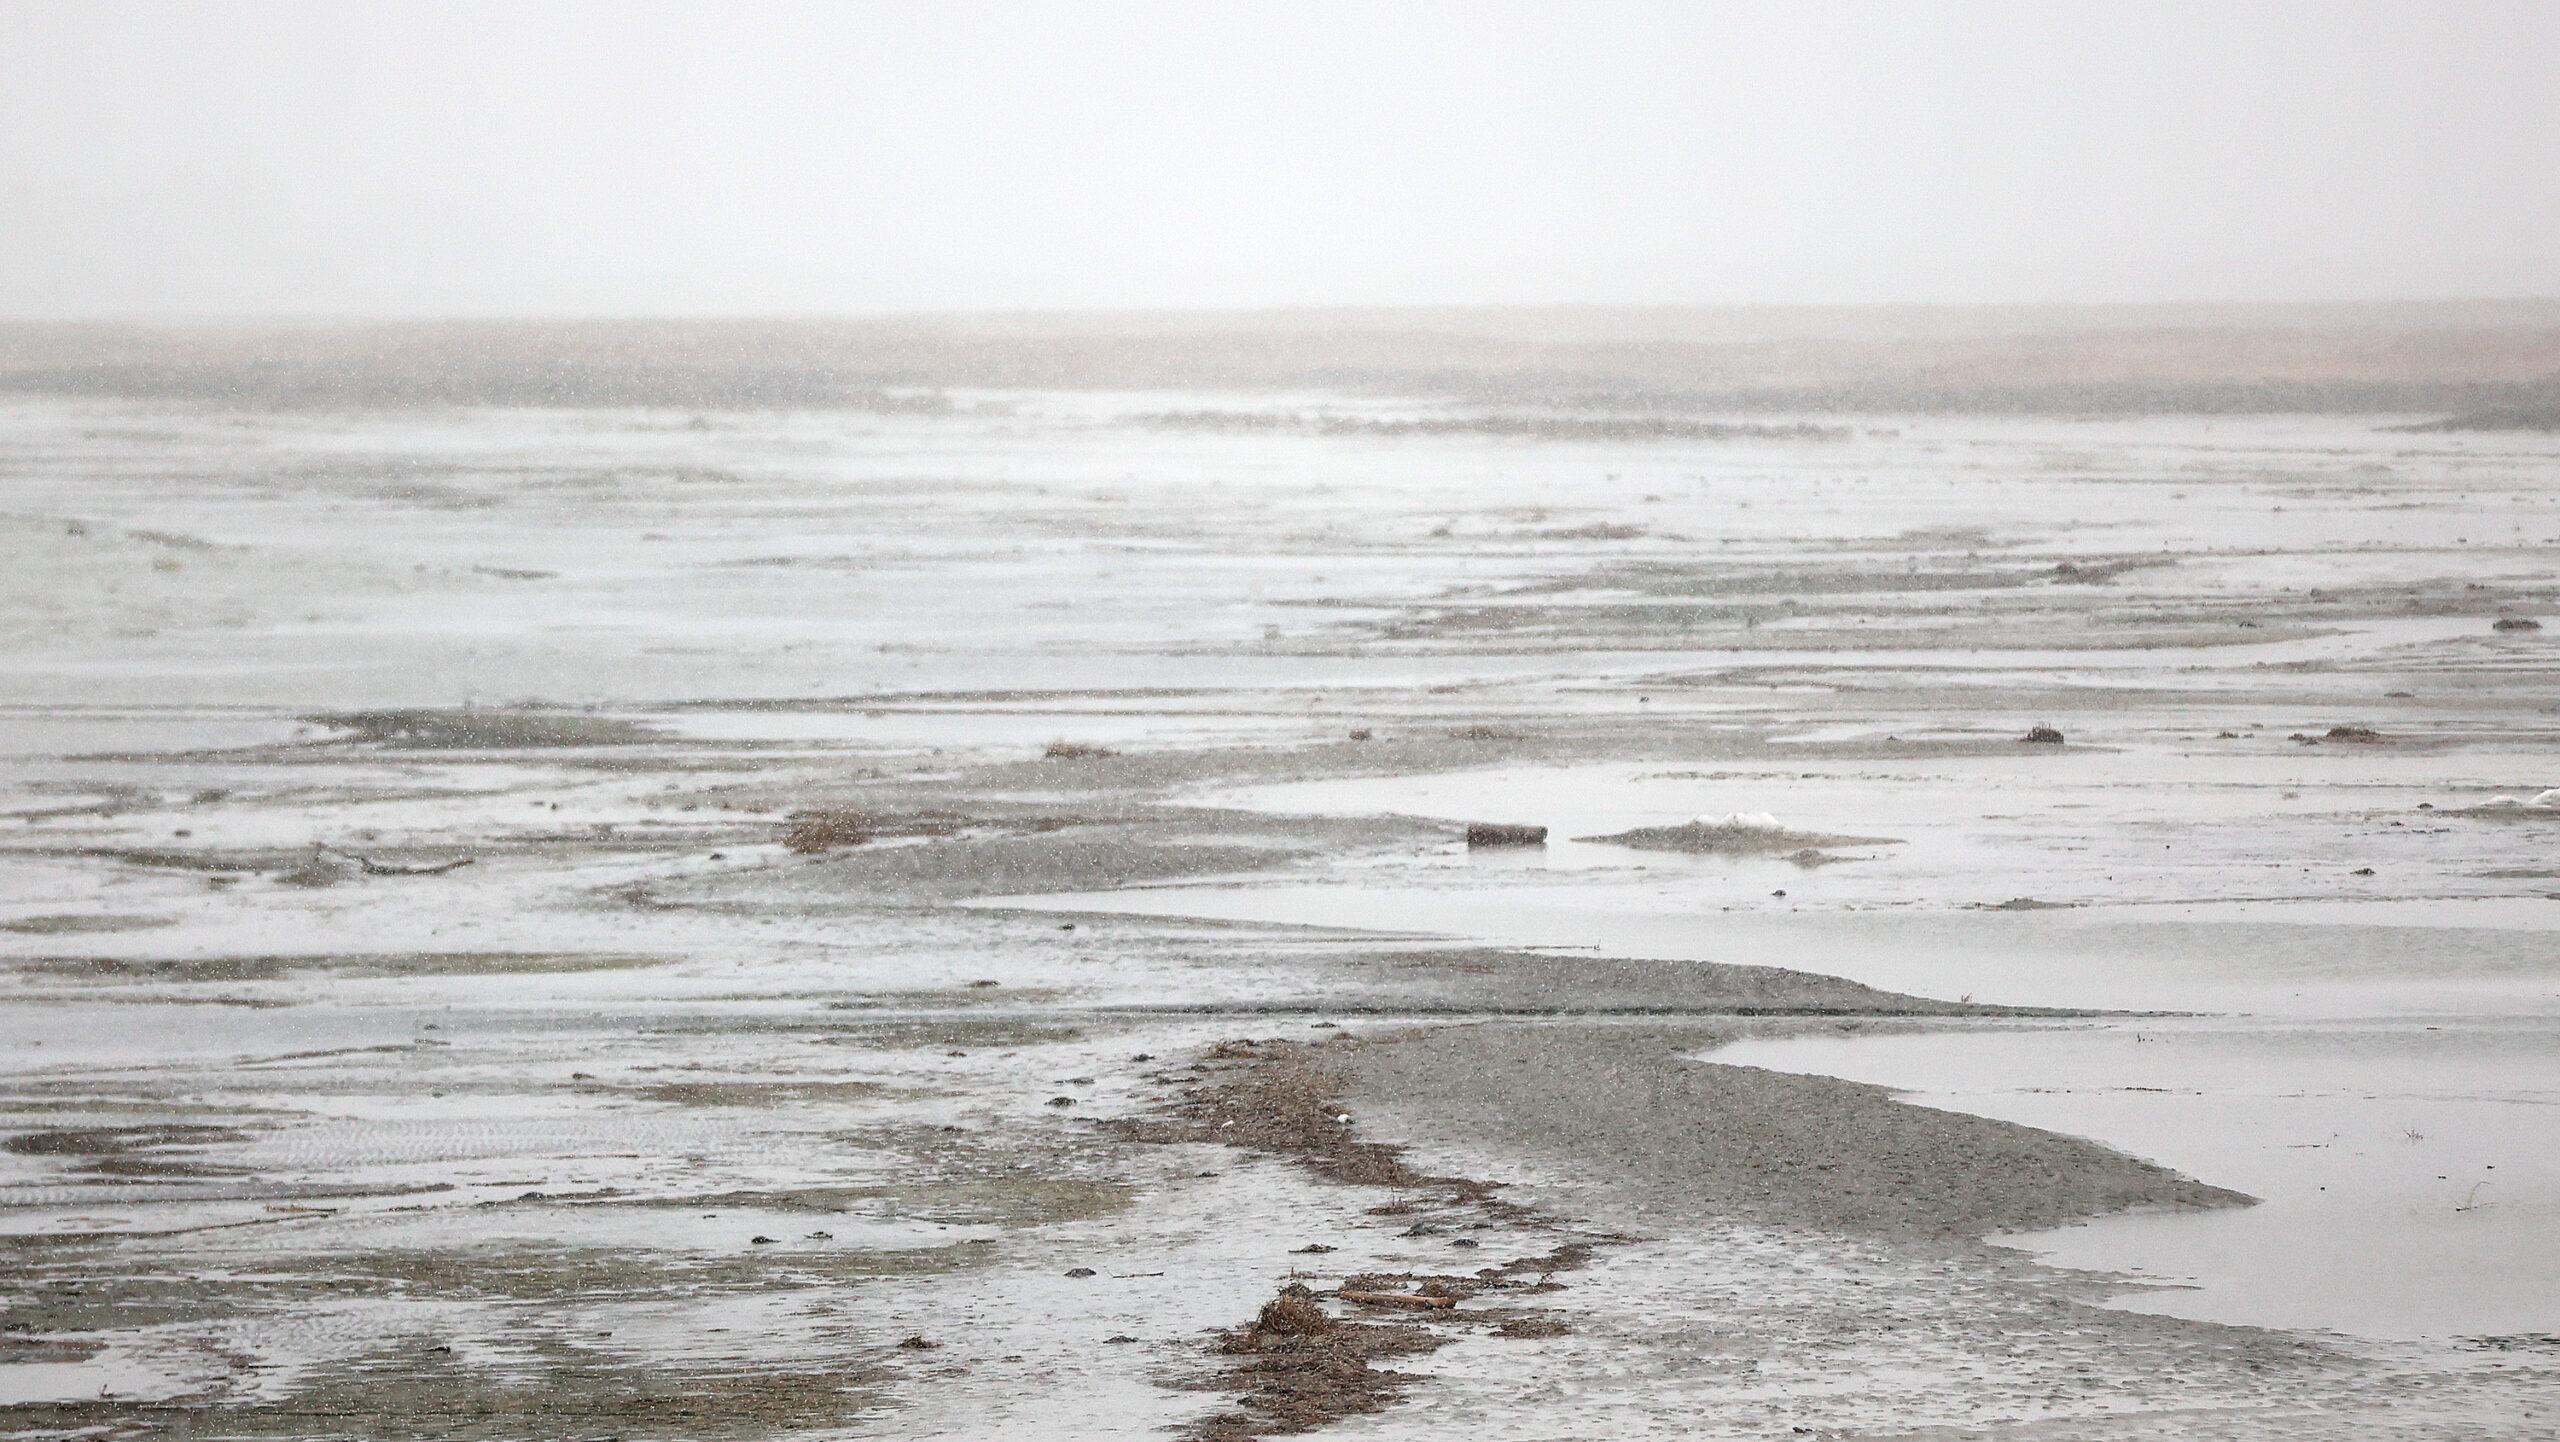 The exposed lakebed of the Great Salt Lake contributes to global warming, study finds [Video]